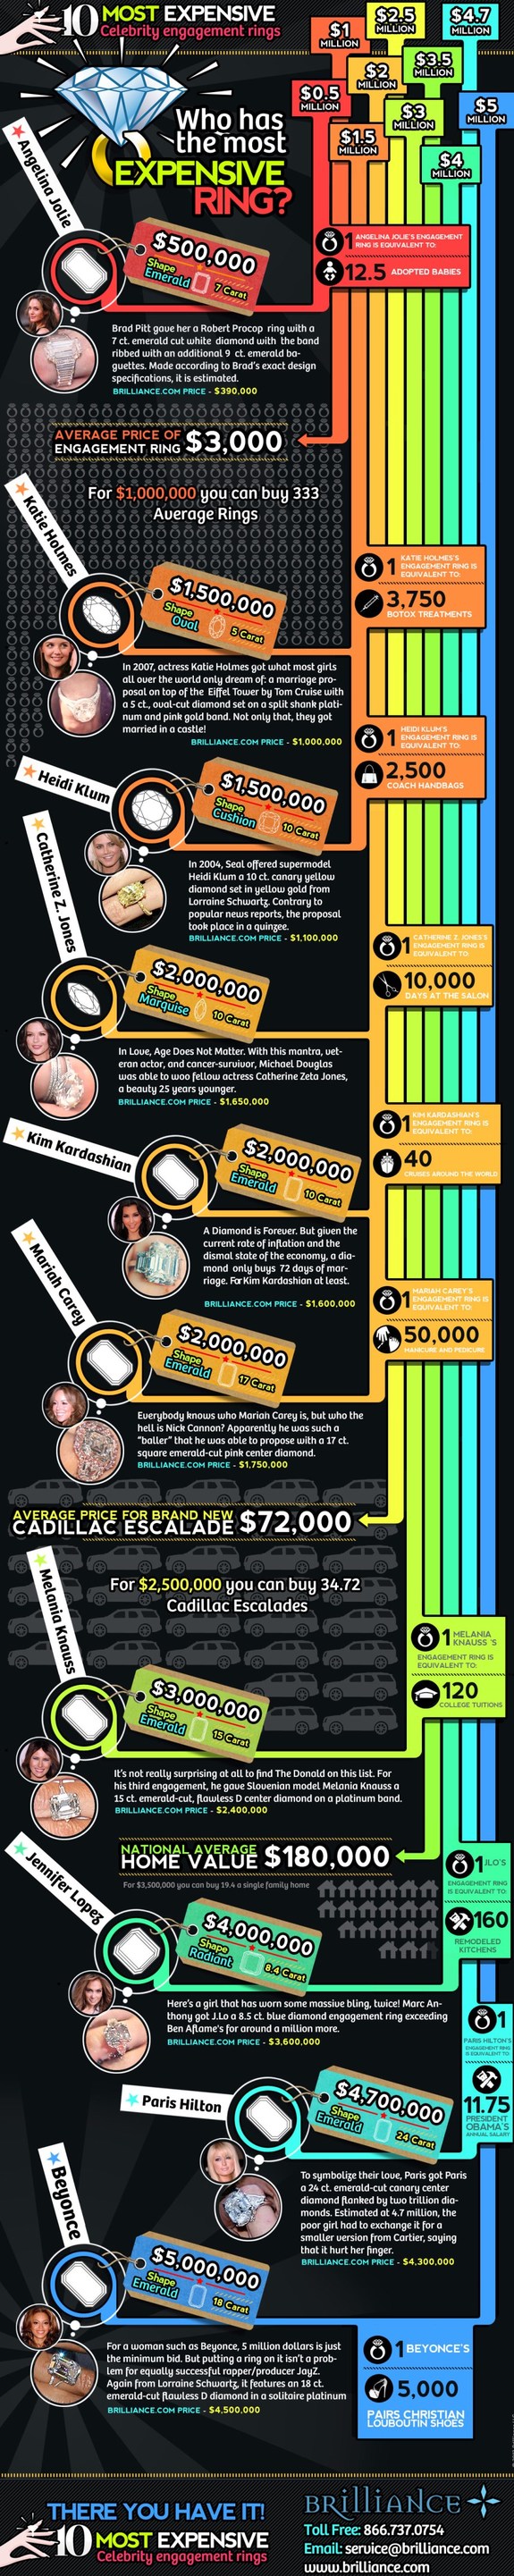 Expensive Celebrity Engagement Rings infographic